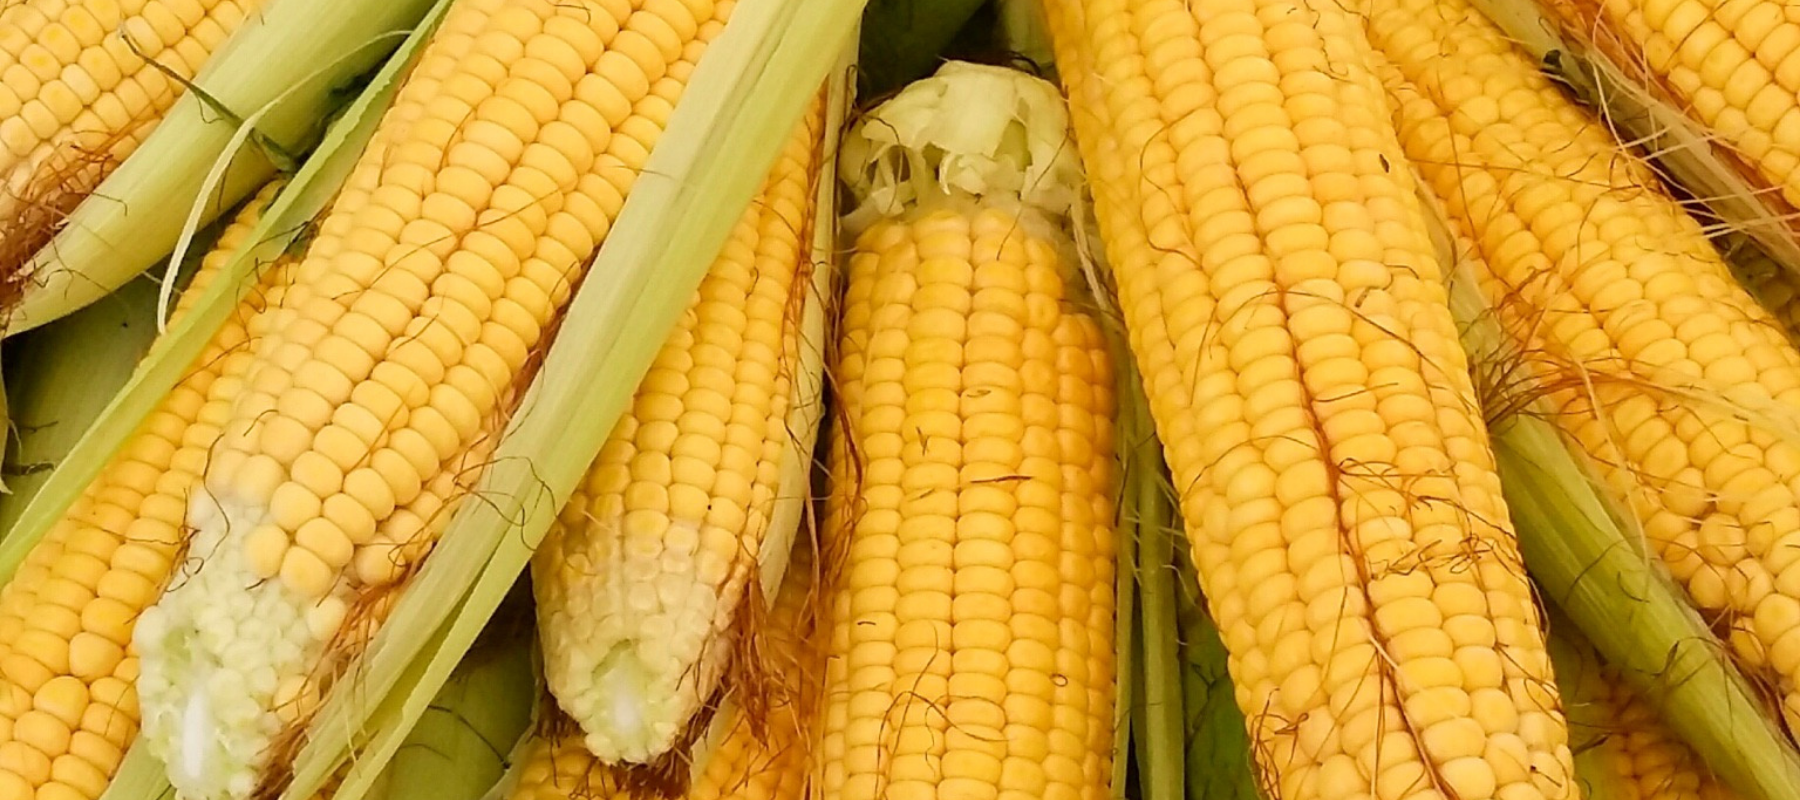 How to Plant, Grow, and Harvest Sweet Corn at Home